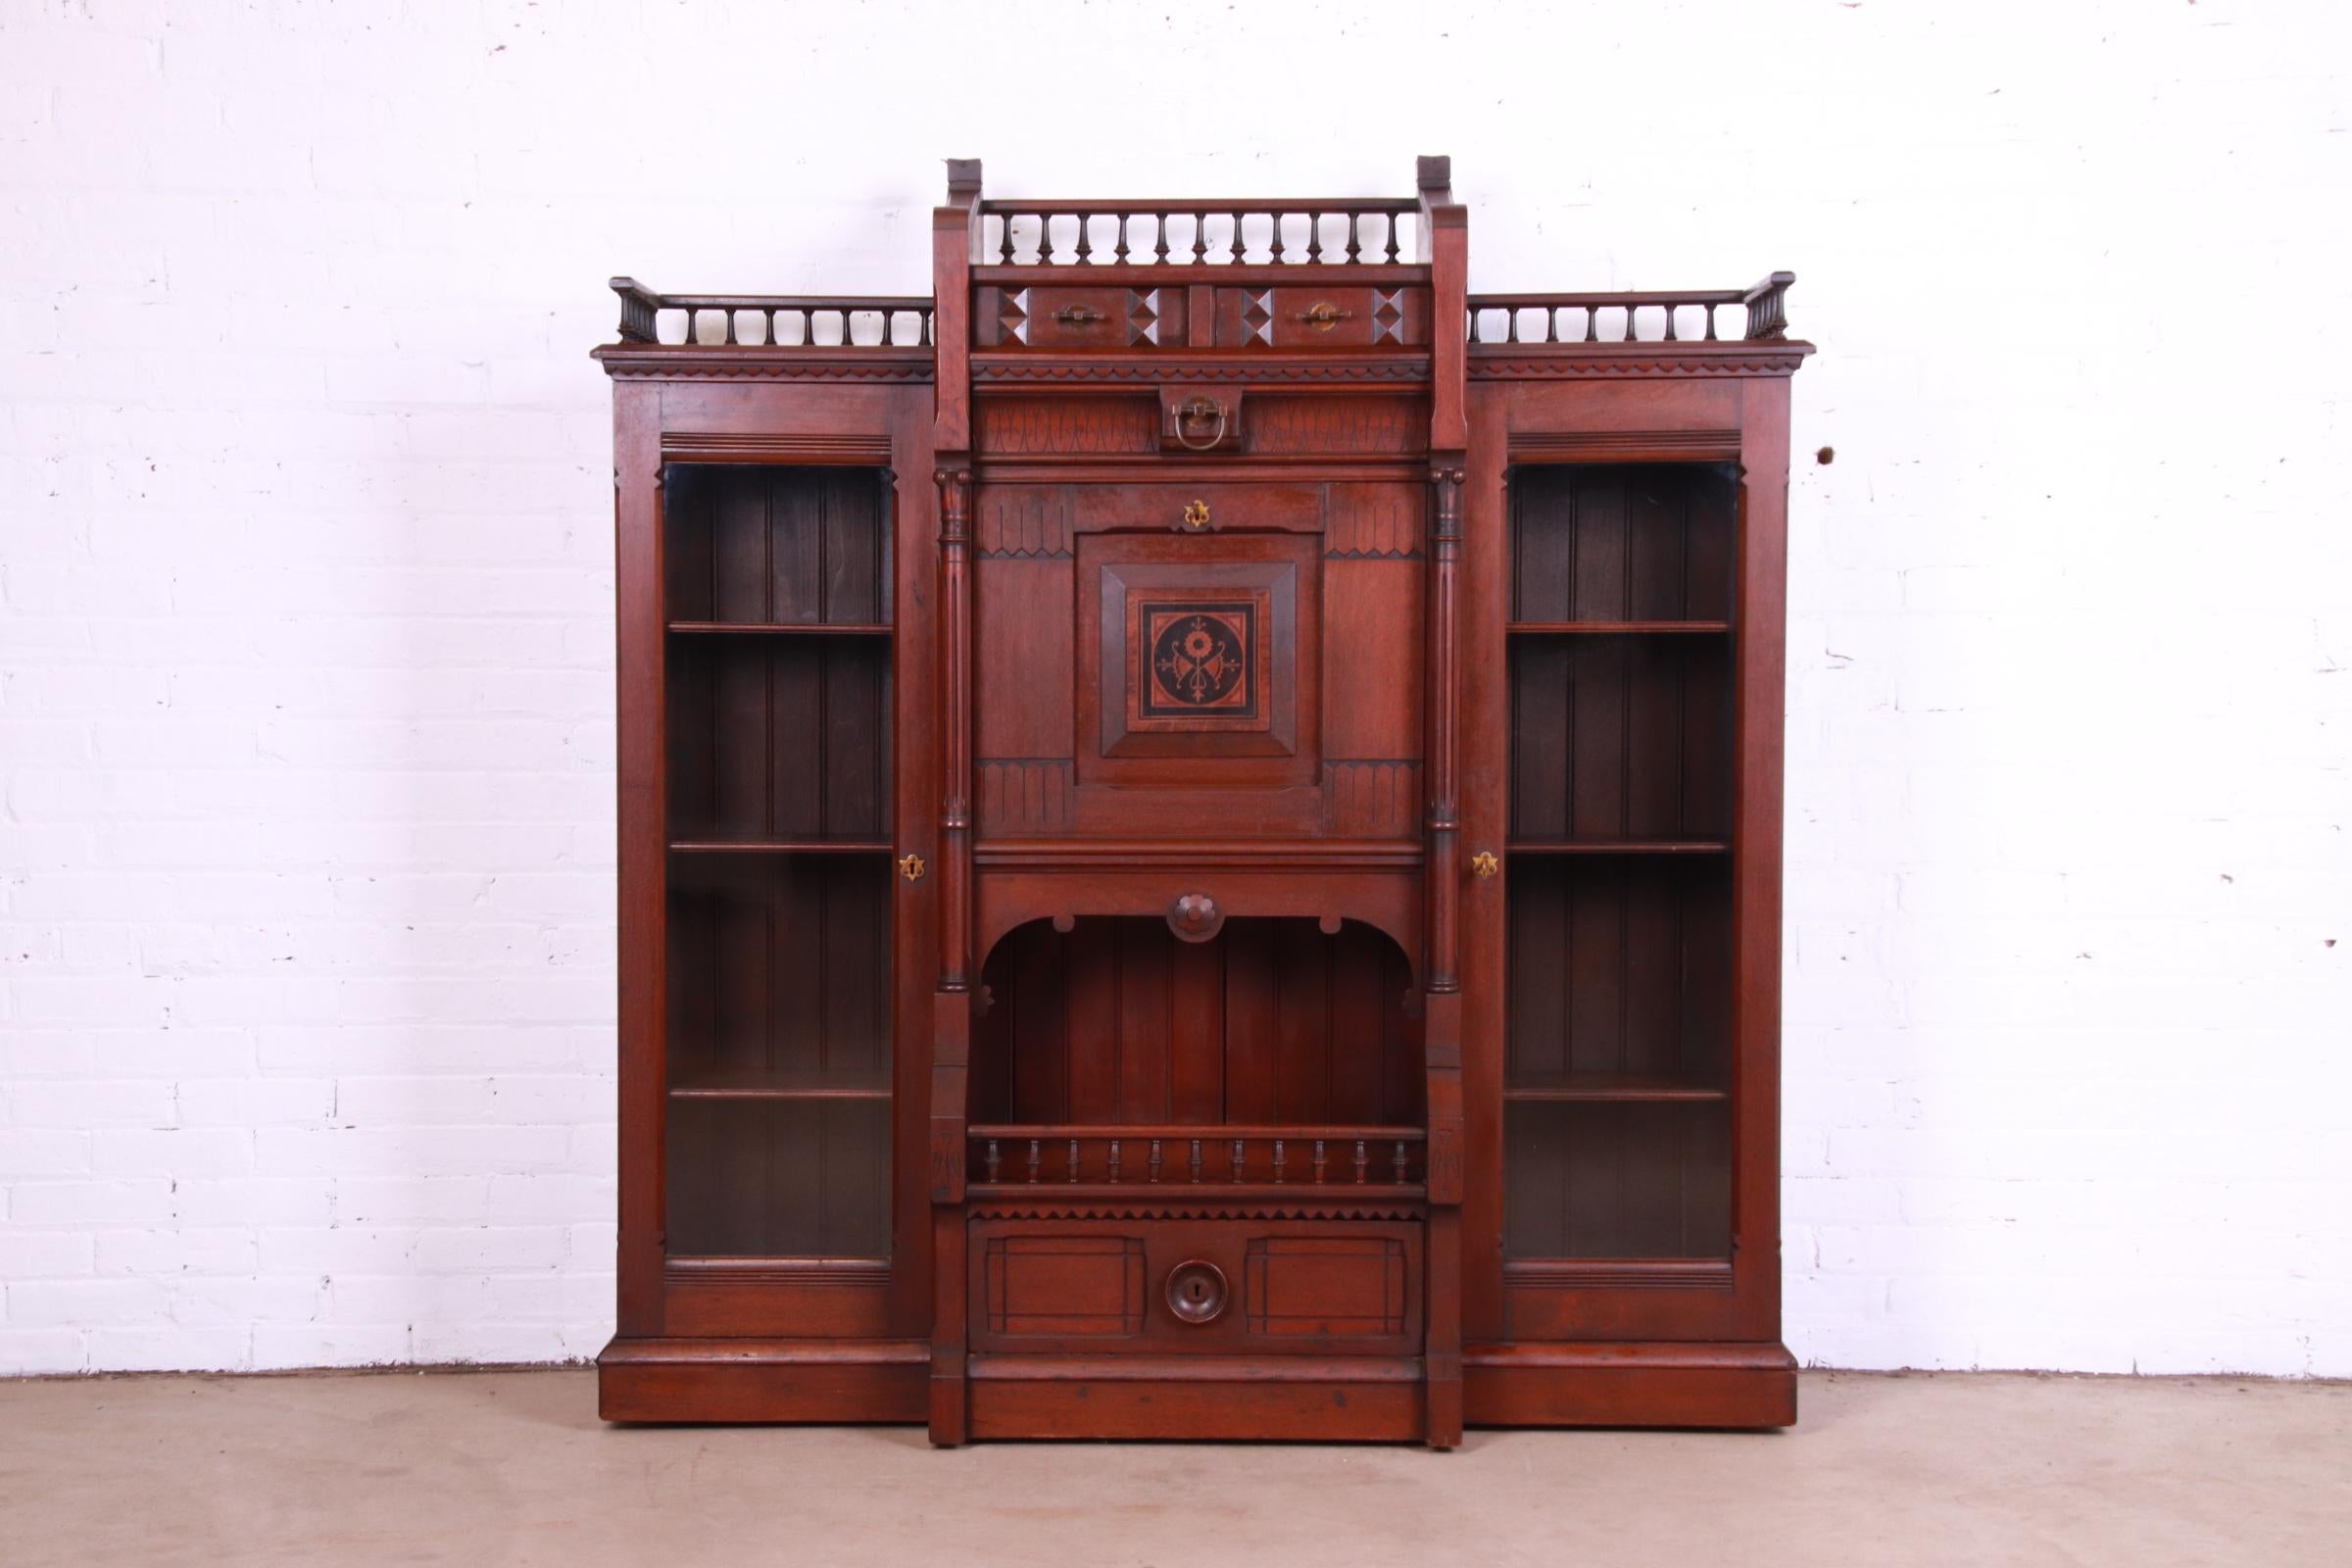 A beautiful antique Victorian Eastlake double bookcase cabinet with drop front secretary desk

USA, Circa 1870s

Carved solid walnut, with glass front doors and original brass hardware. Cabinet locks, and key is included.

Measures: 59.25